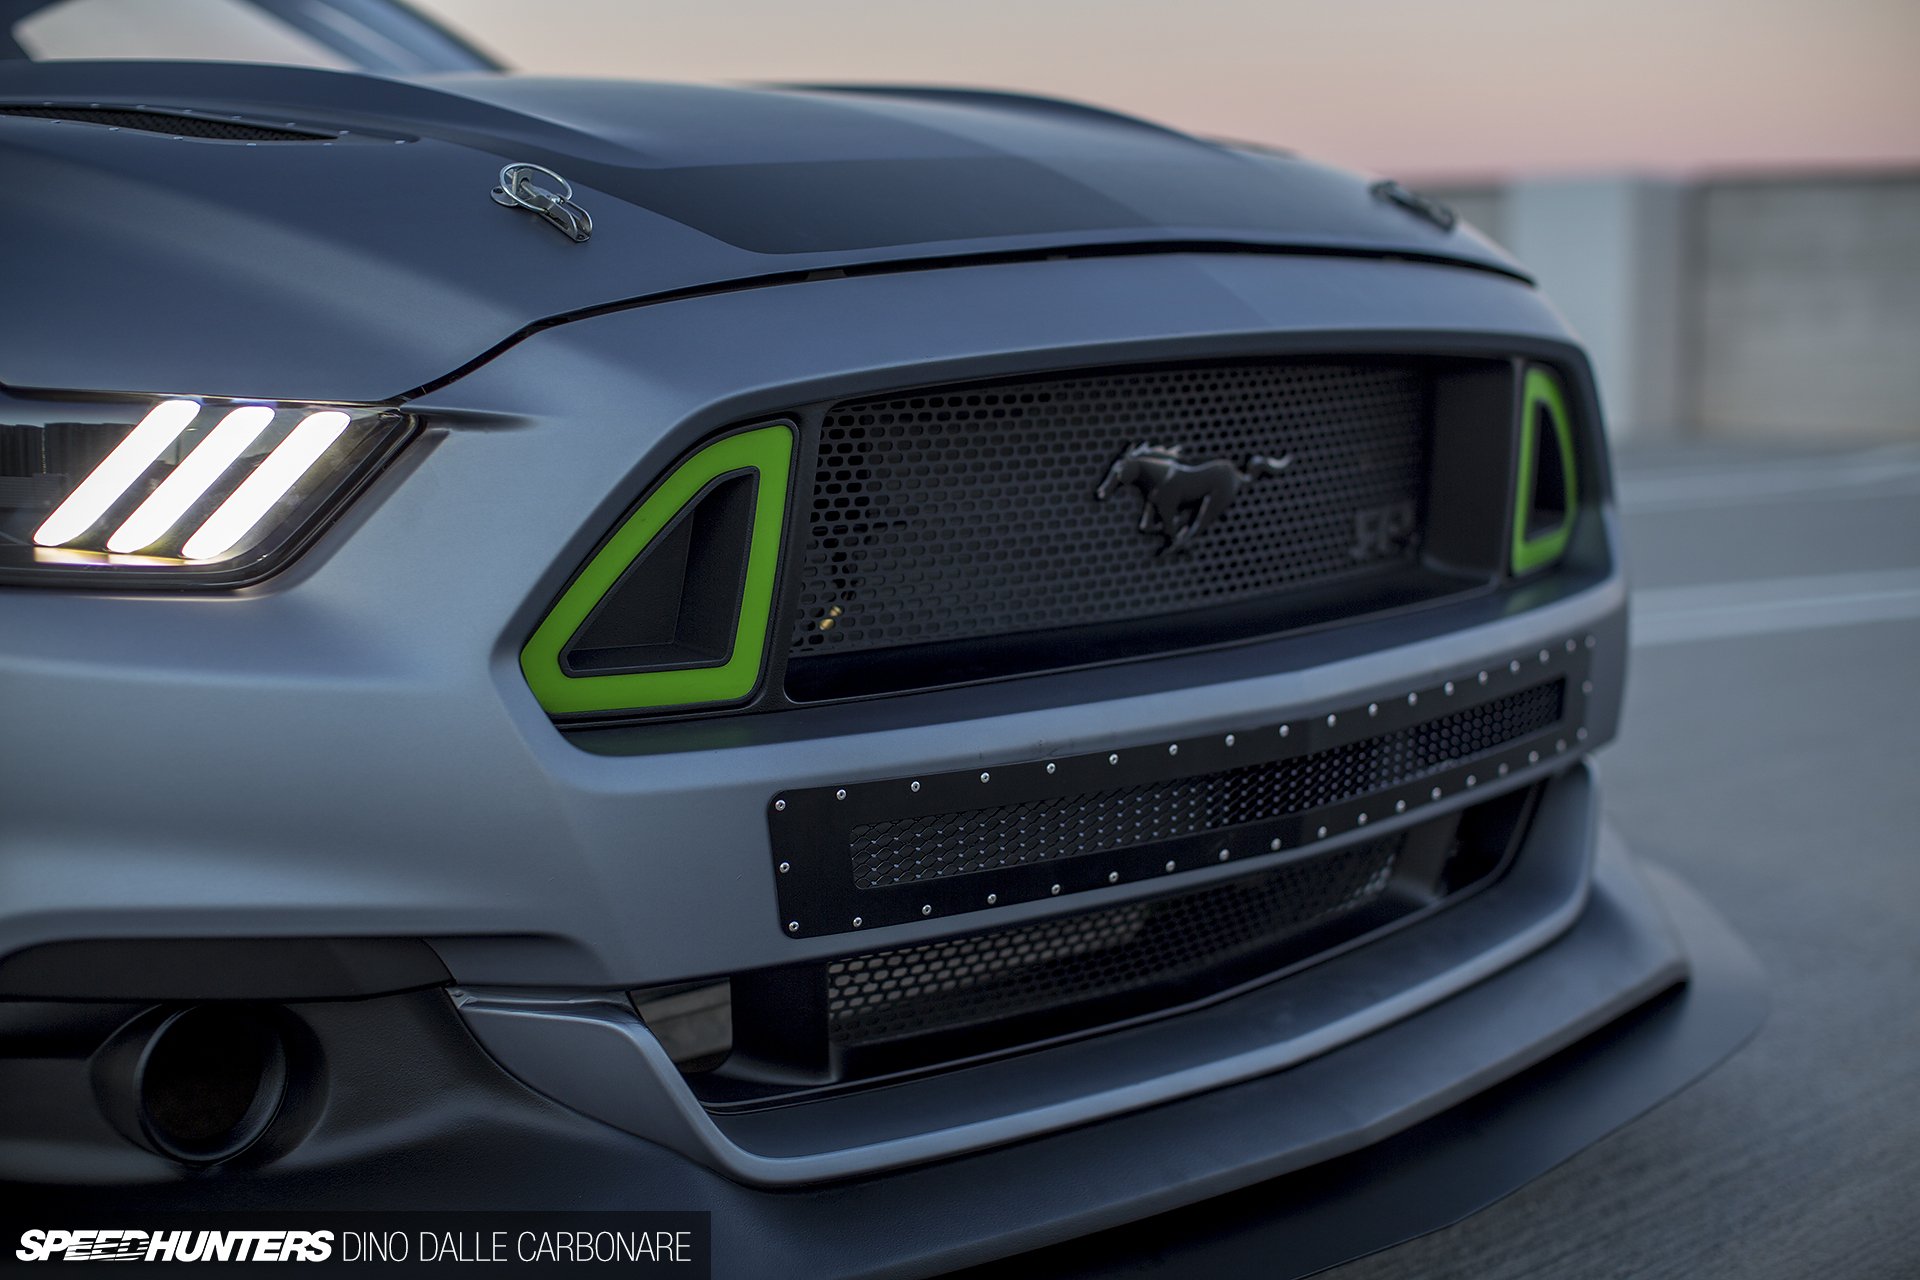 2015, Ford, Mustang, Rtr, Muscle, Drift, Race, Racing, Tuning, Hot, Rod, Rods Wallpaper